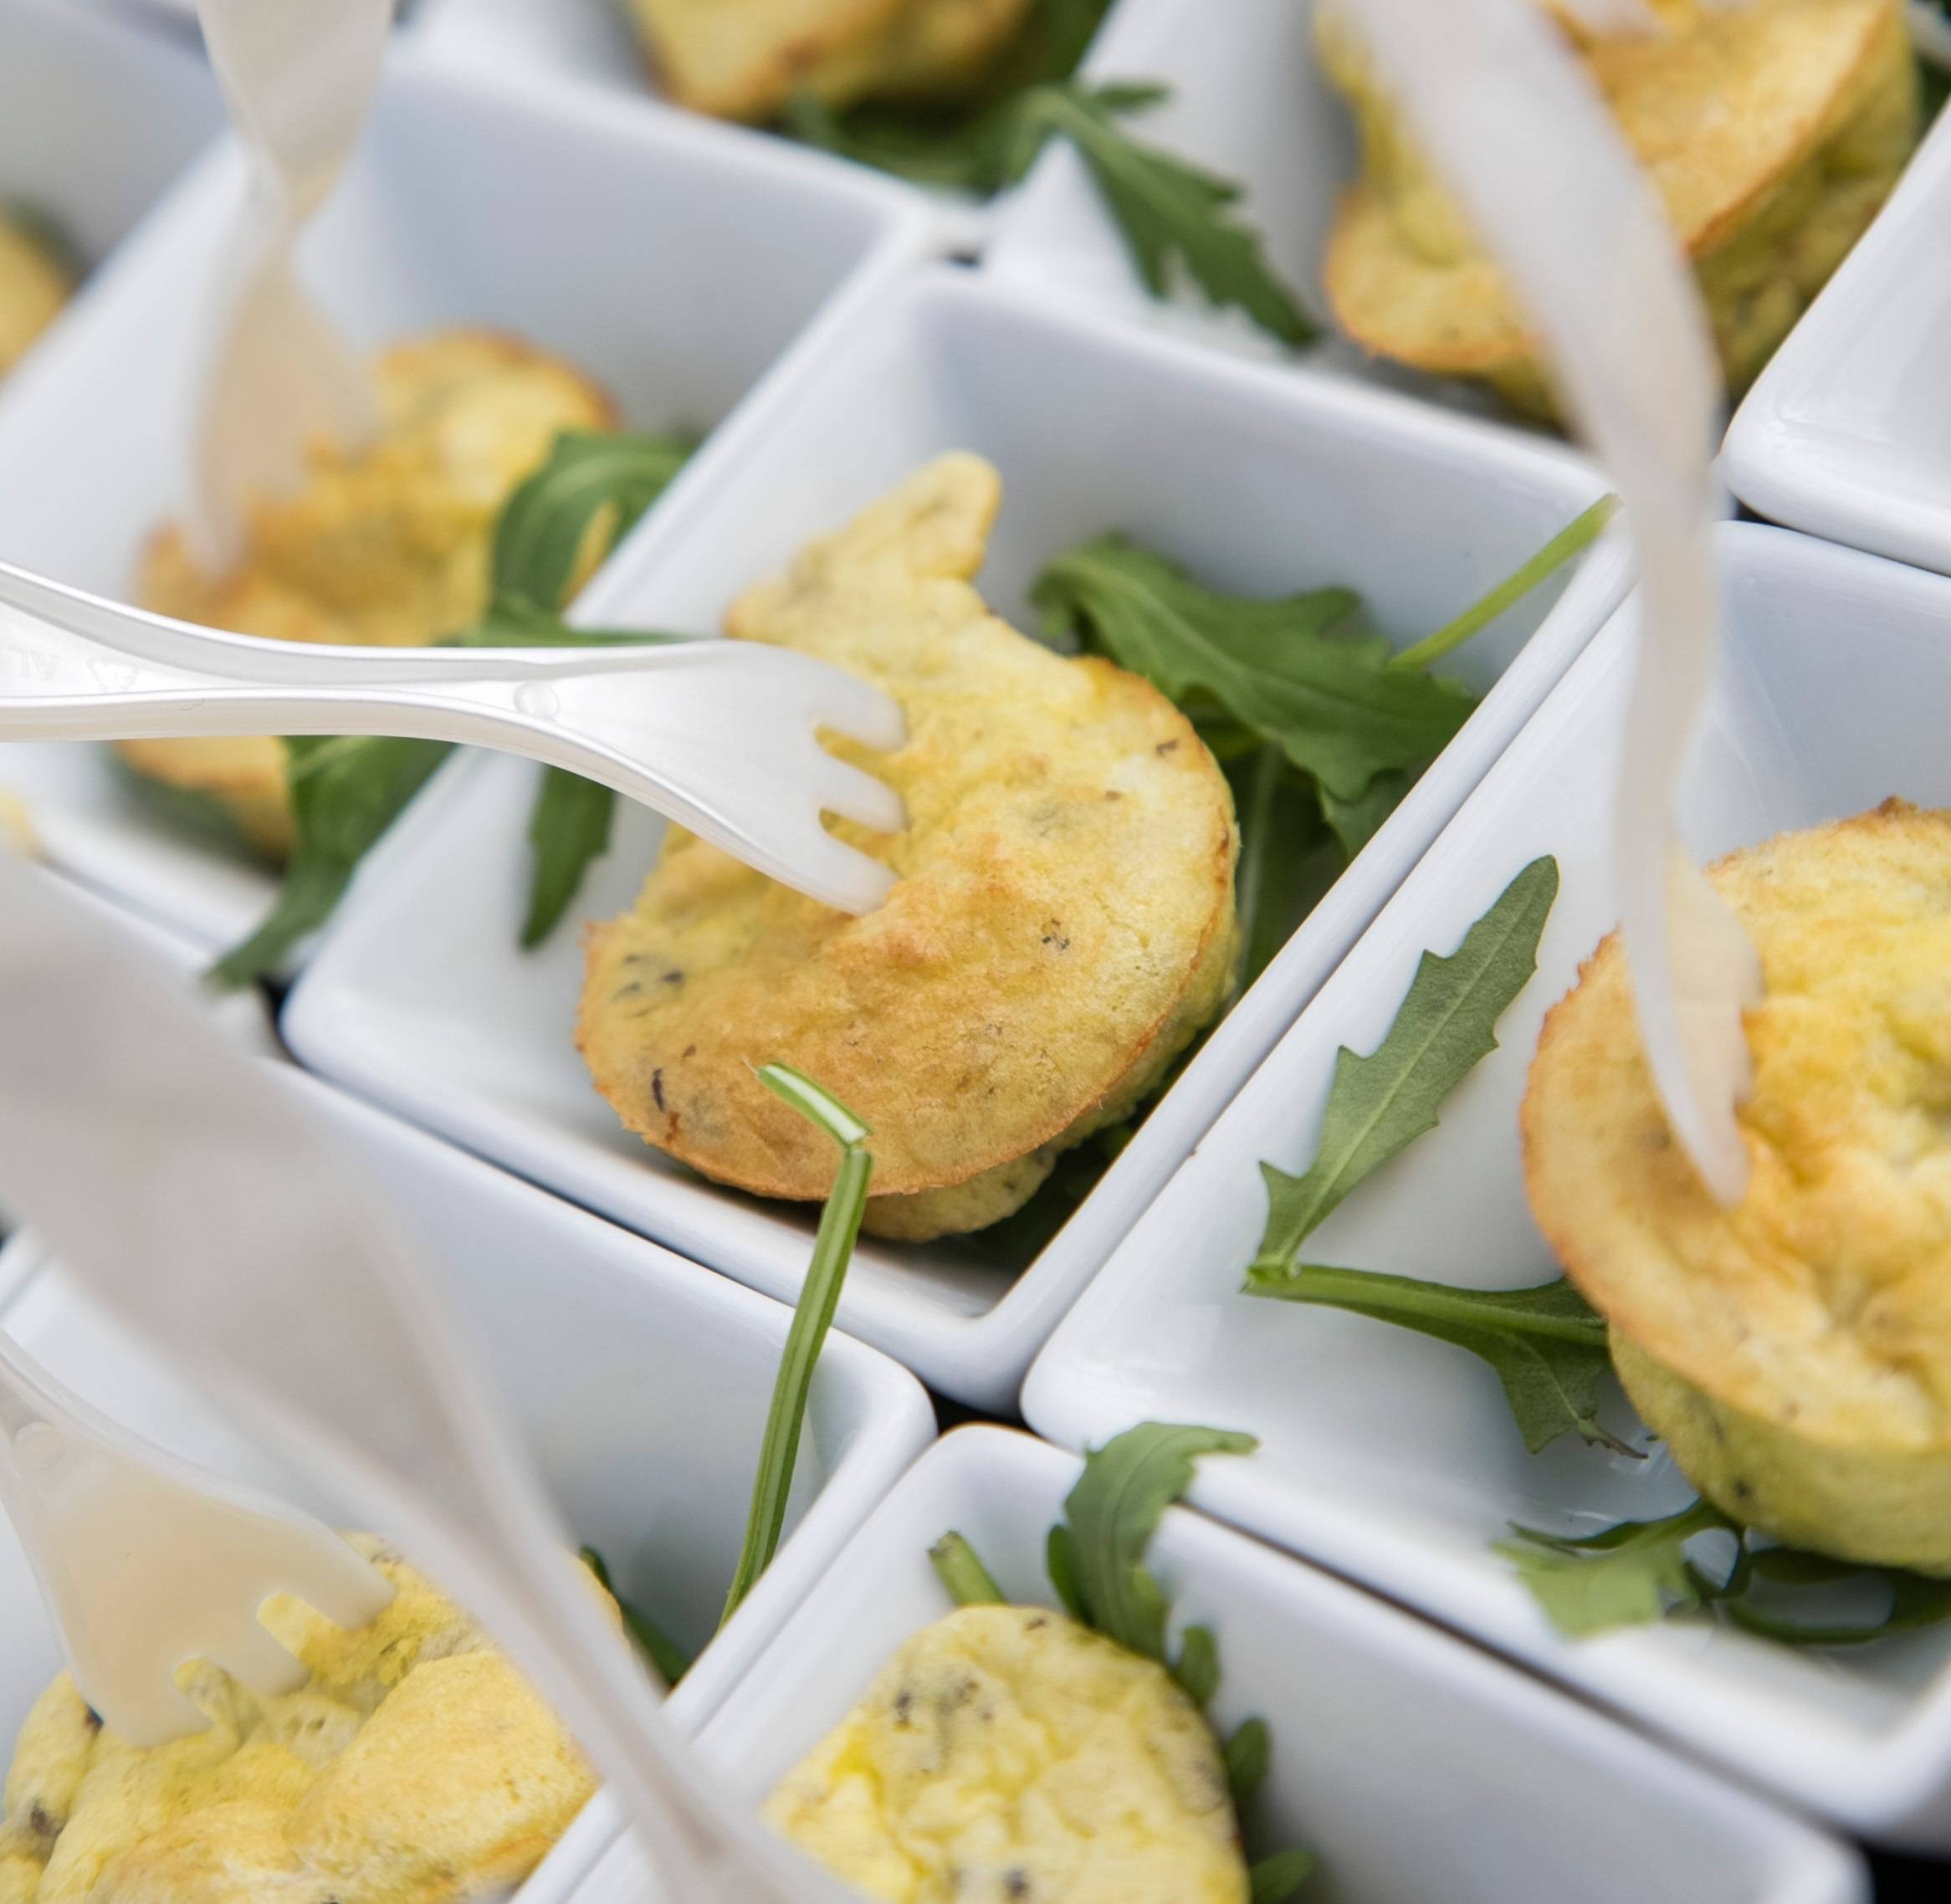 Fingerfood Catering Berlin